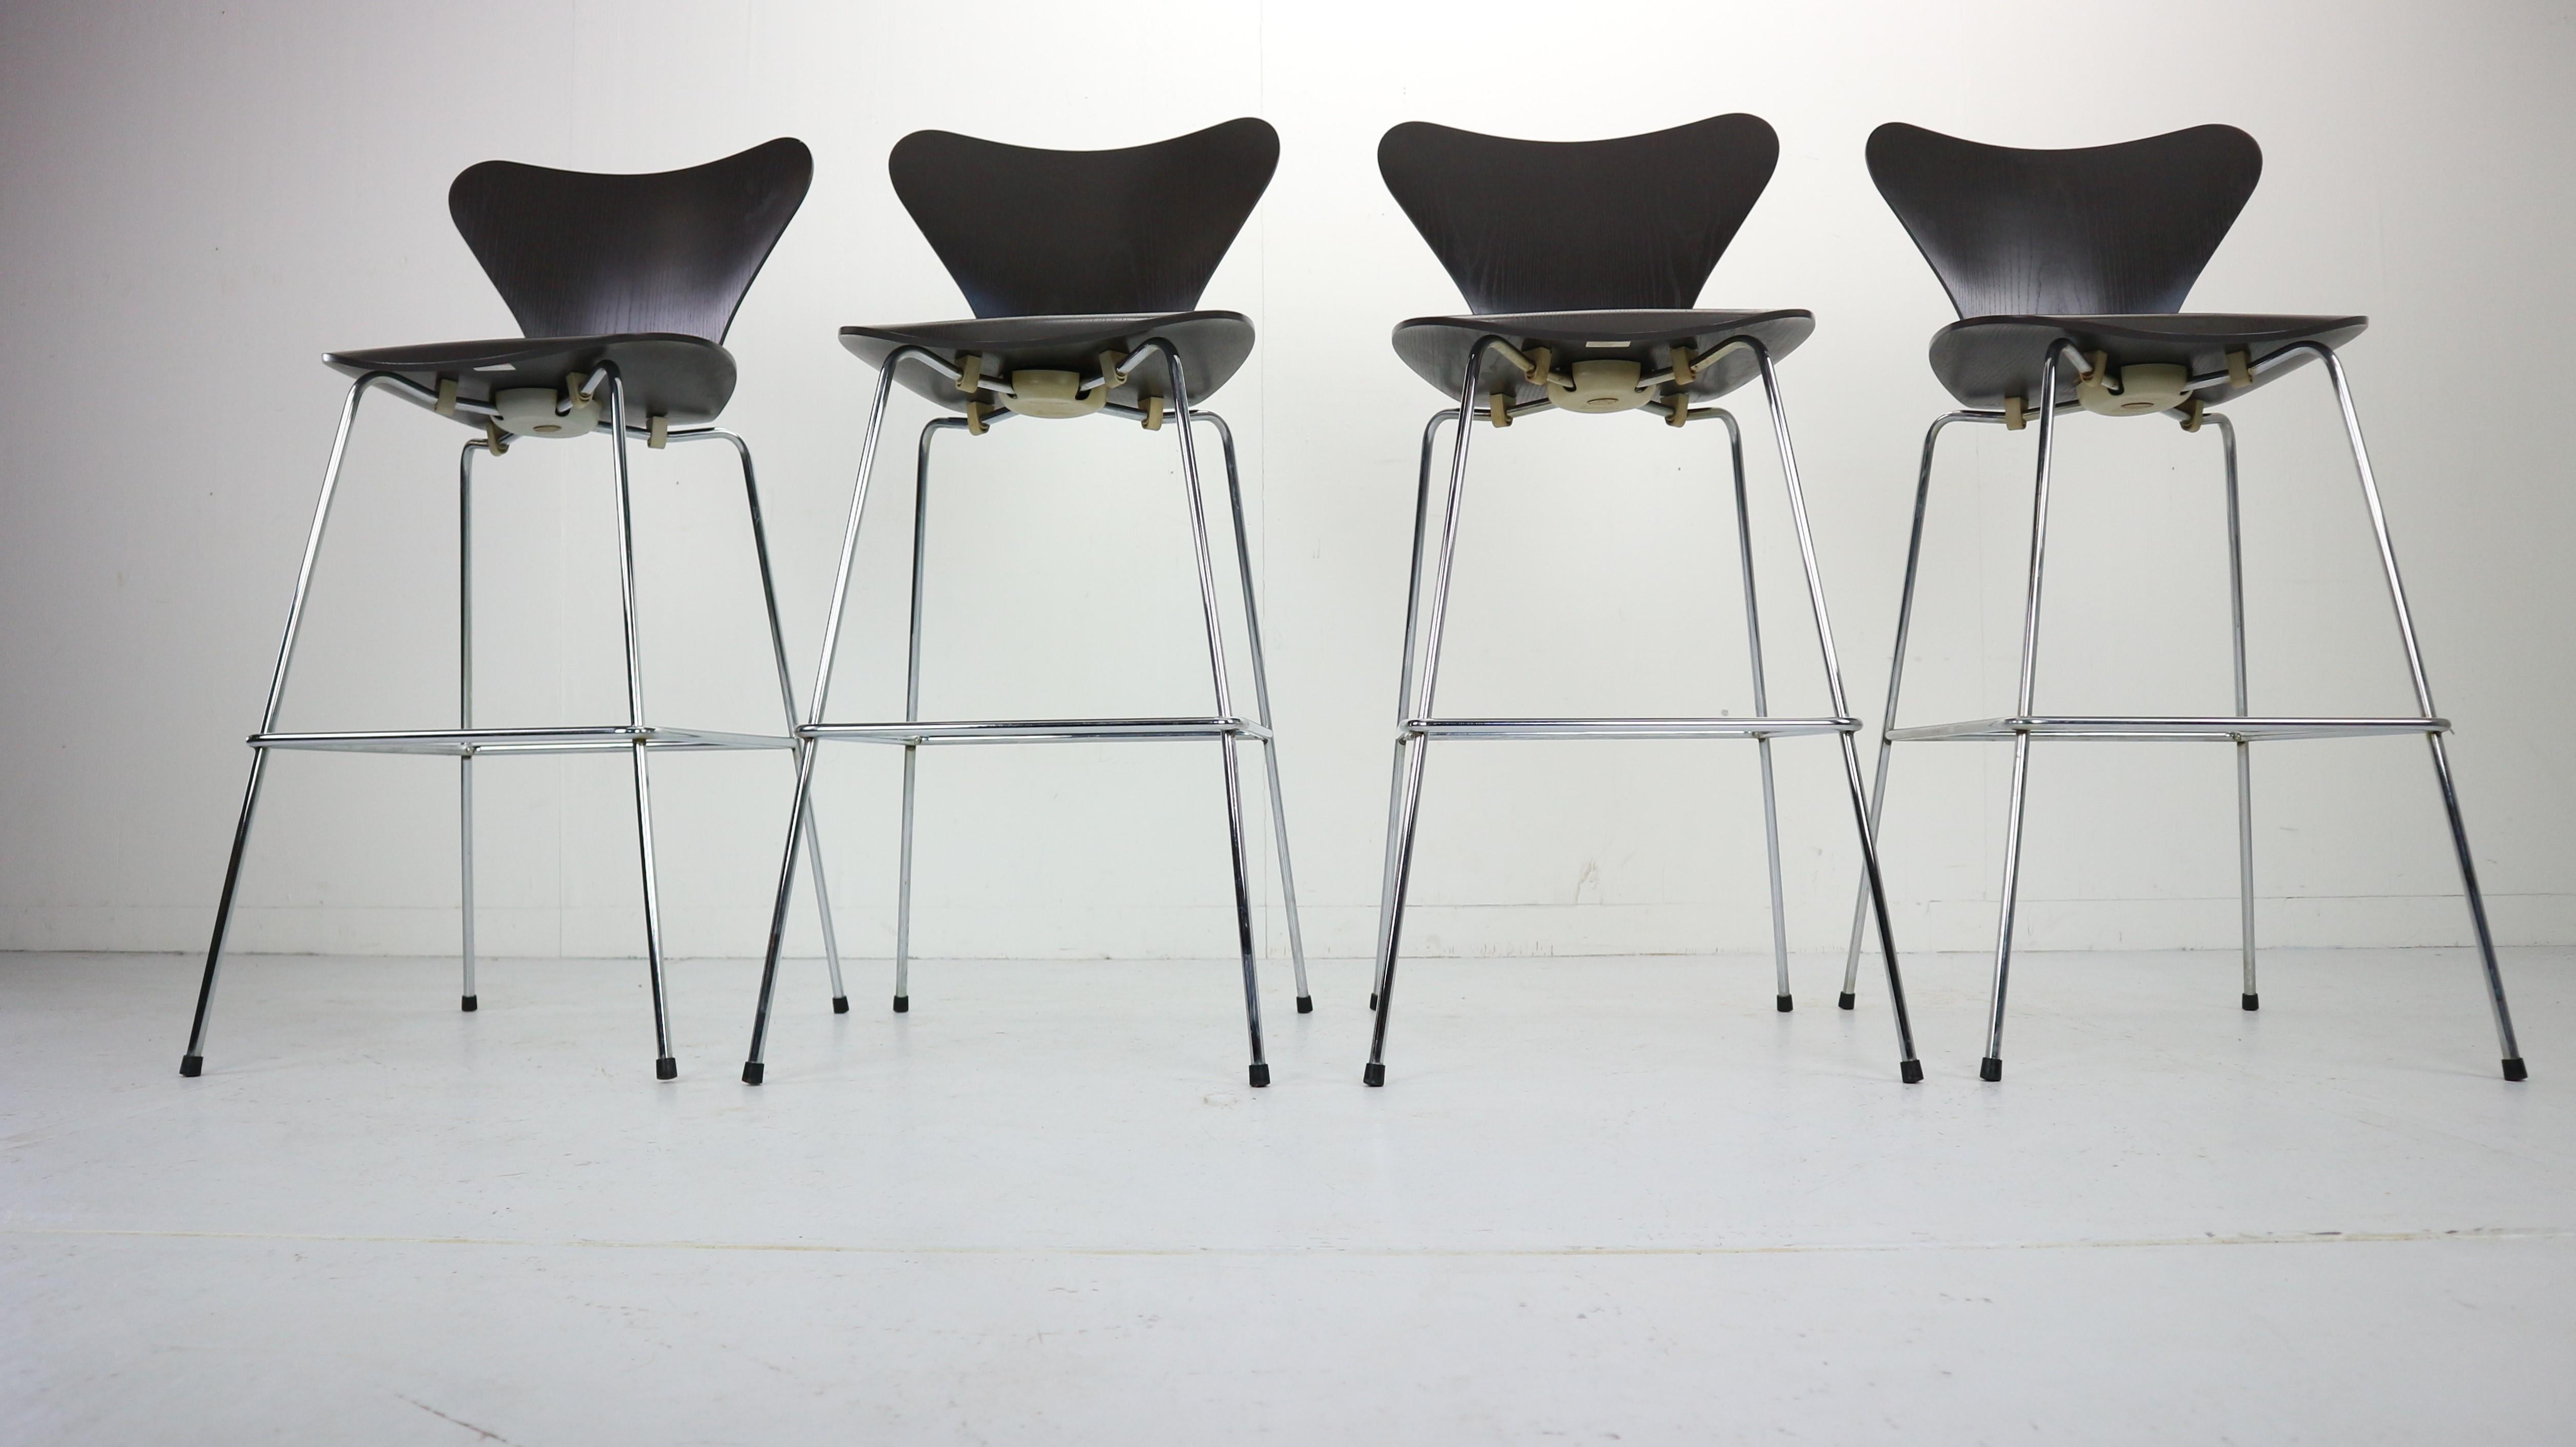 Set of 4 bar stools, all originally marked by Arne Jacobsen for Fritz Hansen manufacture 1950's, Denmark.
Made of black wood veneer and polychromed steel.
Seating comfort and can be combined with different bases for a range of dining chairs,